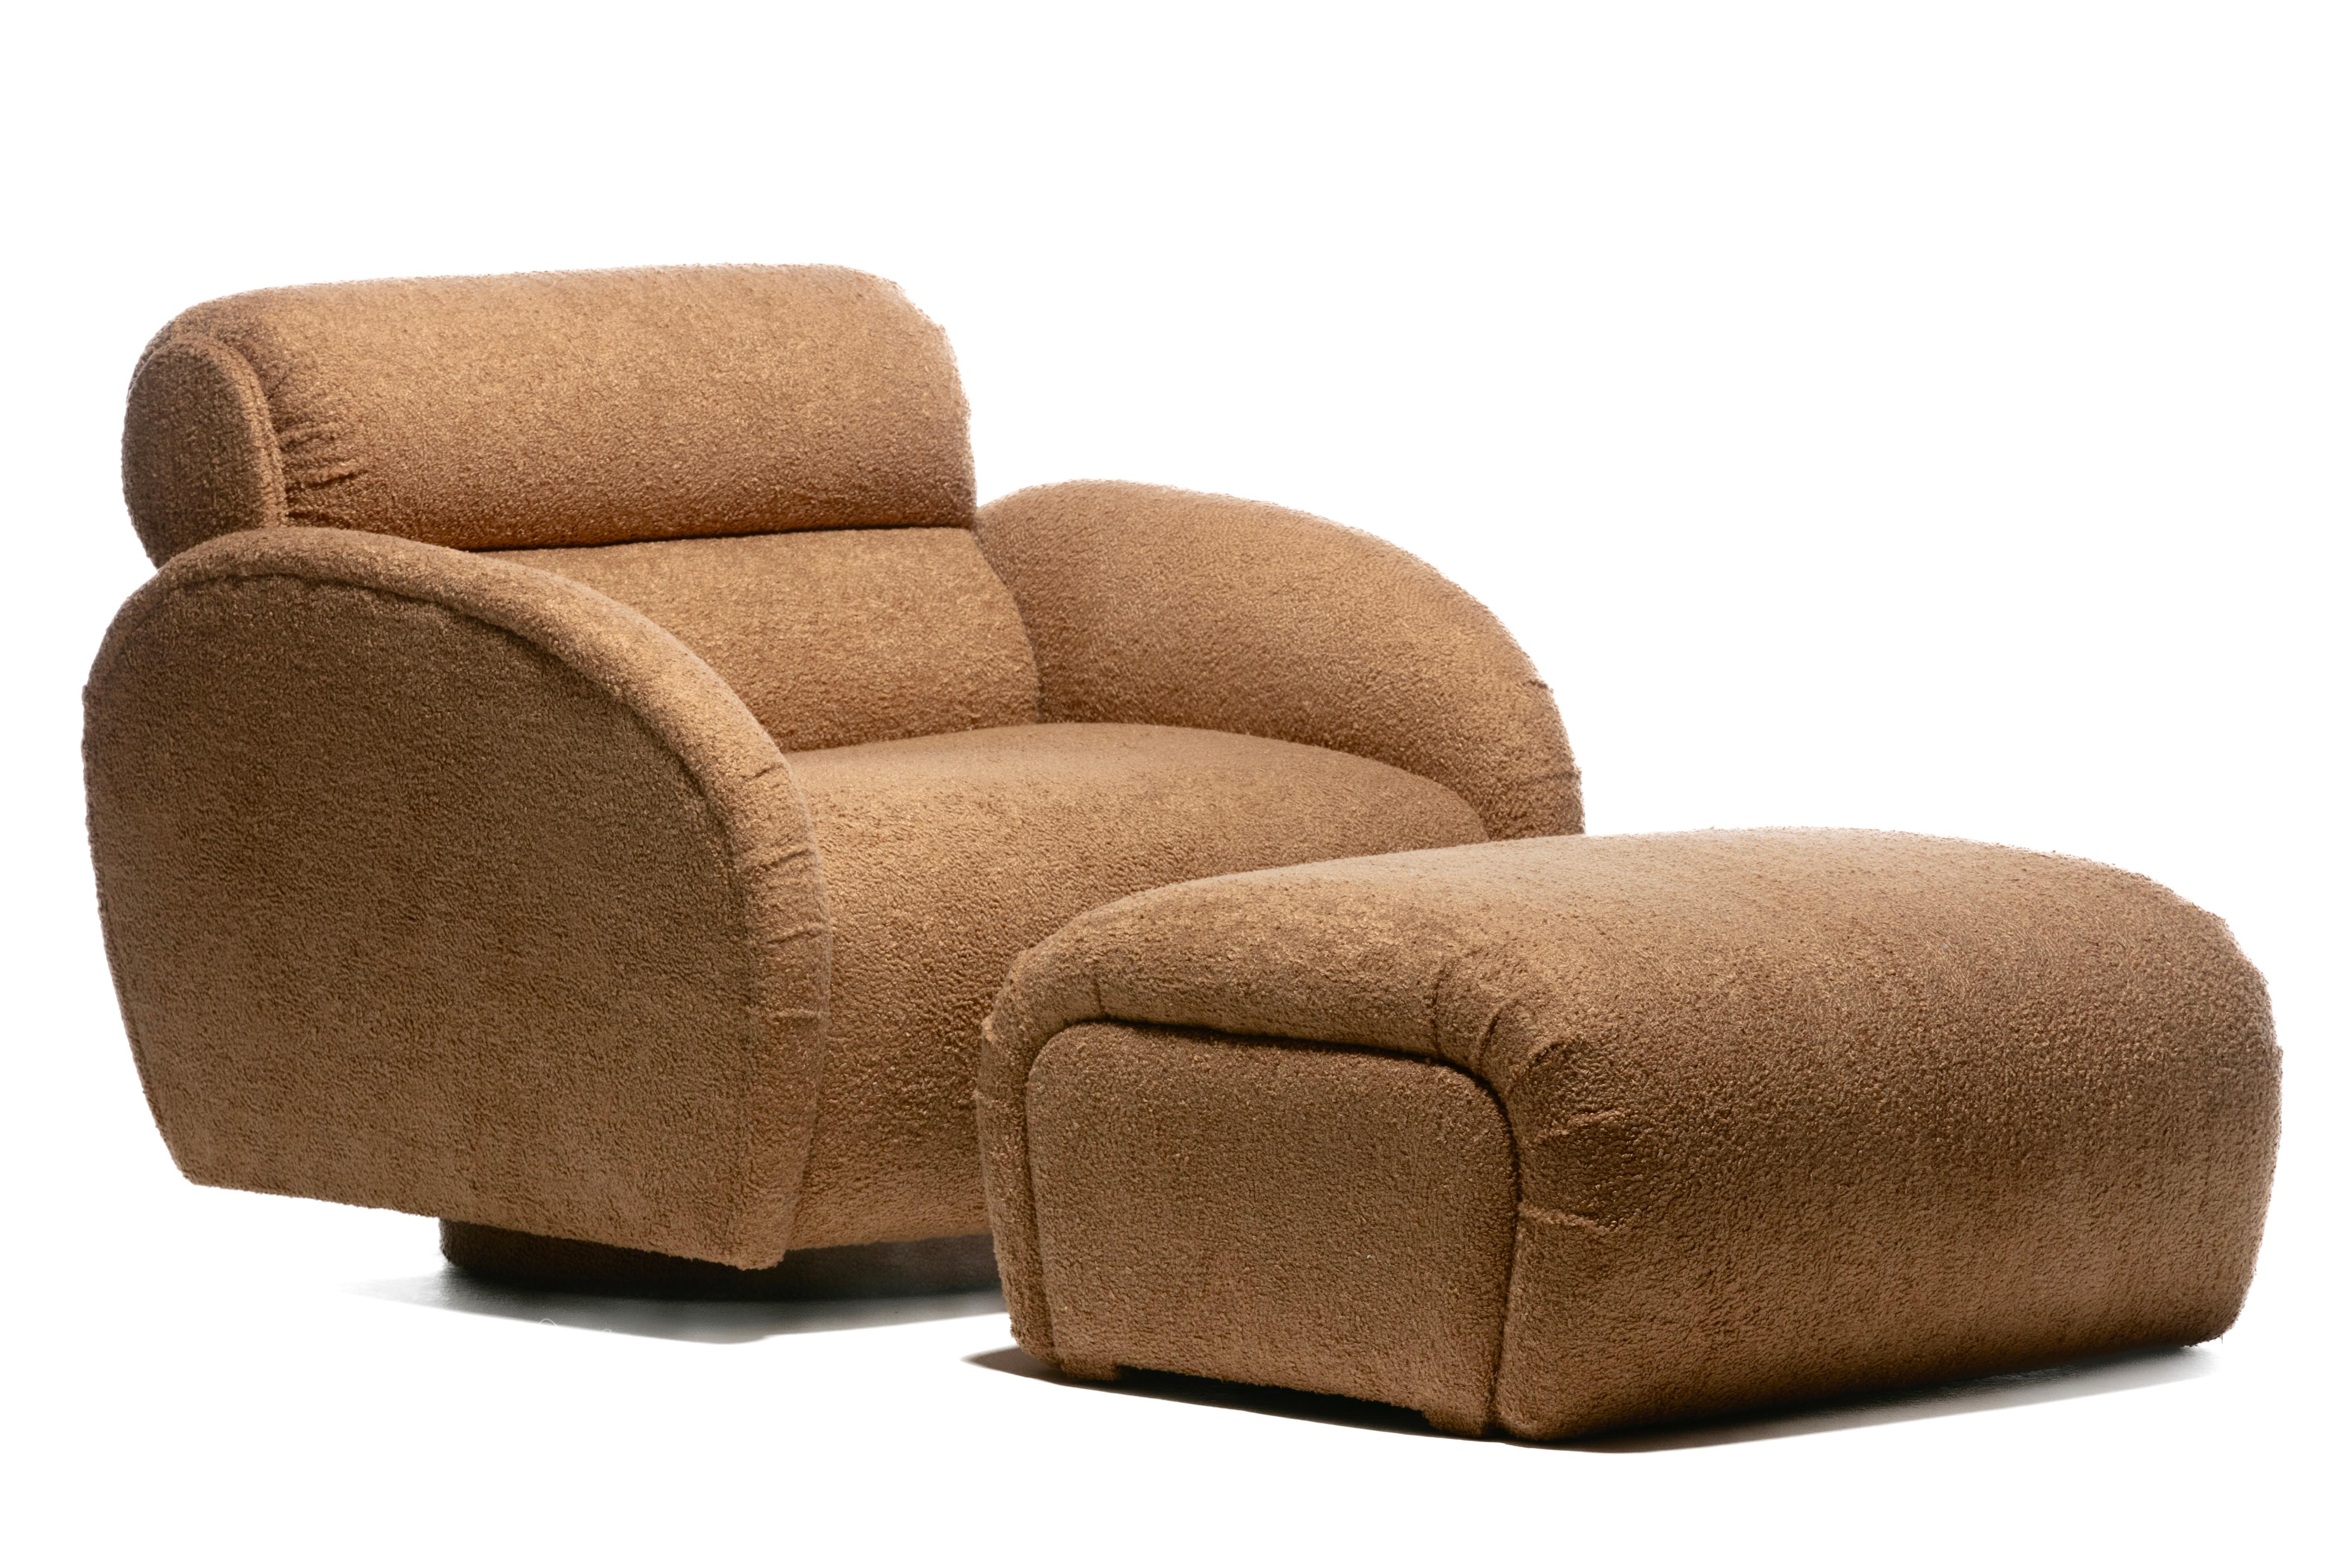 Large Scale Directional Post Modern Swivel Chairs & Ottoman in Mocha Fabric For Sale 11